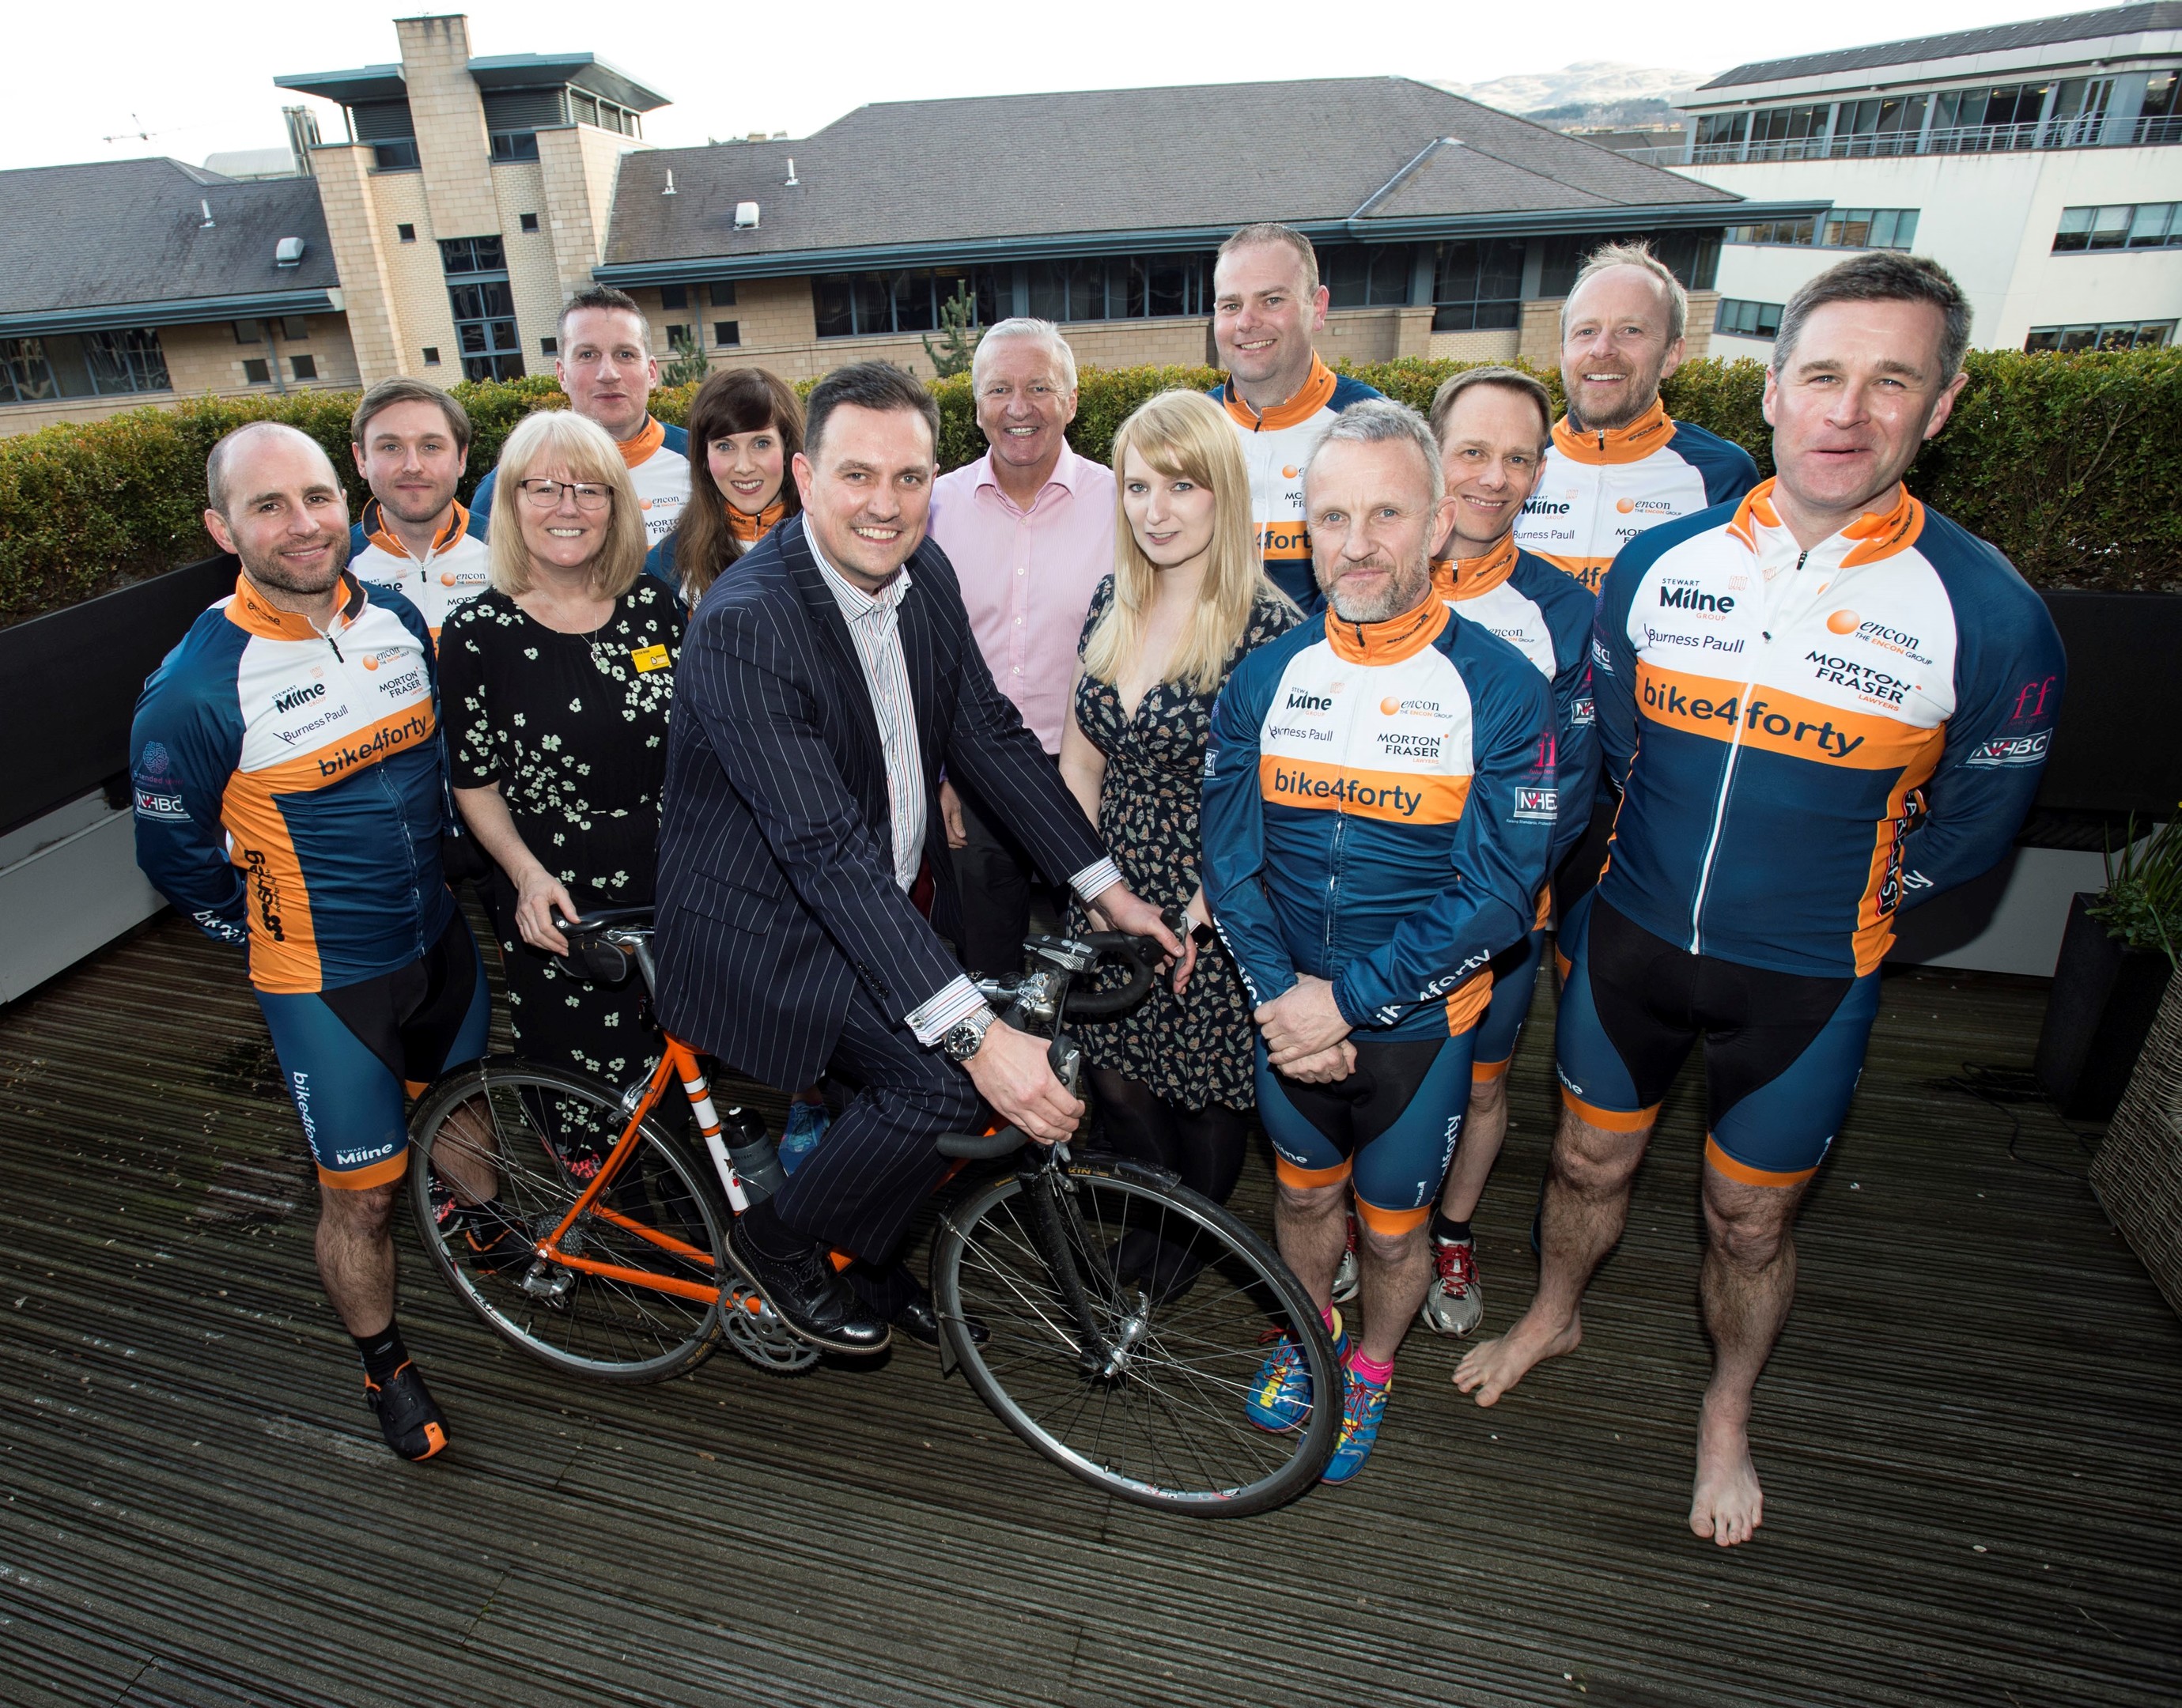 The STewart Milne team have raised more than £40,000 for charity